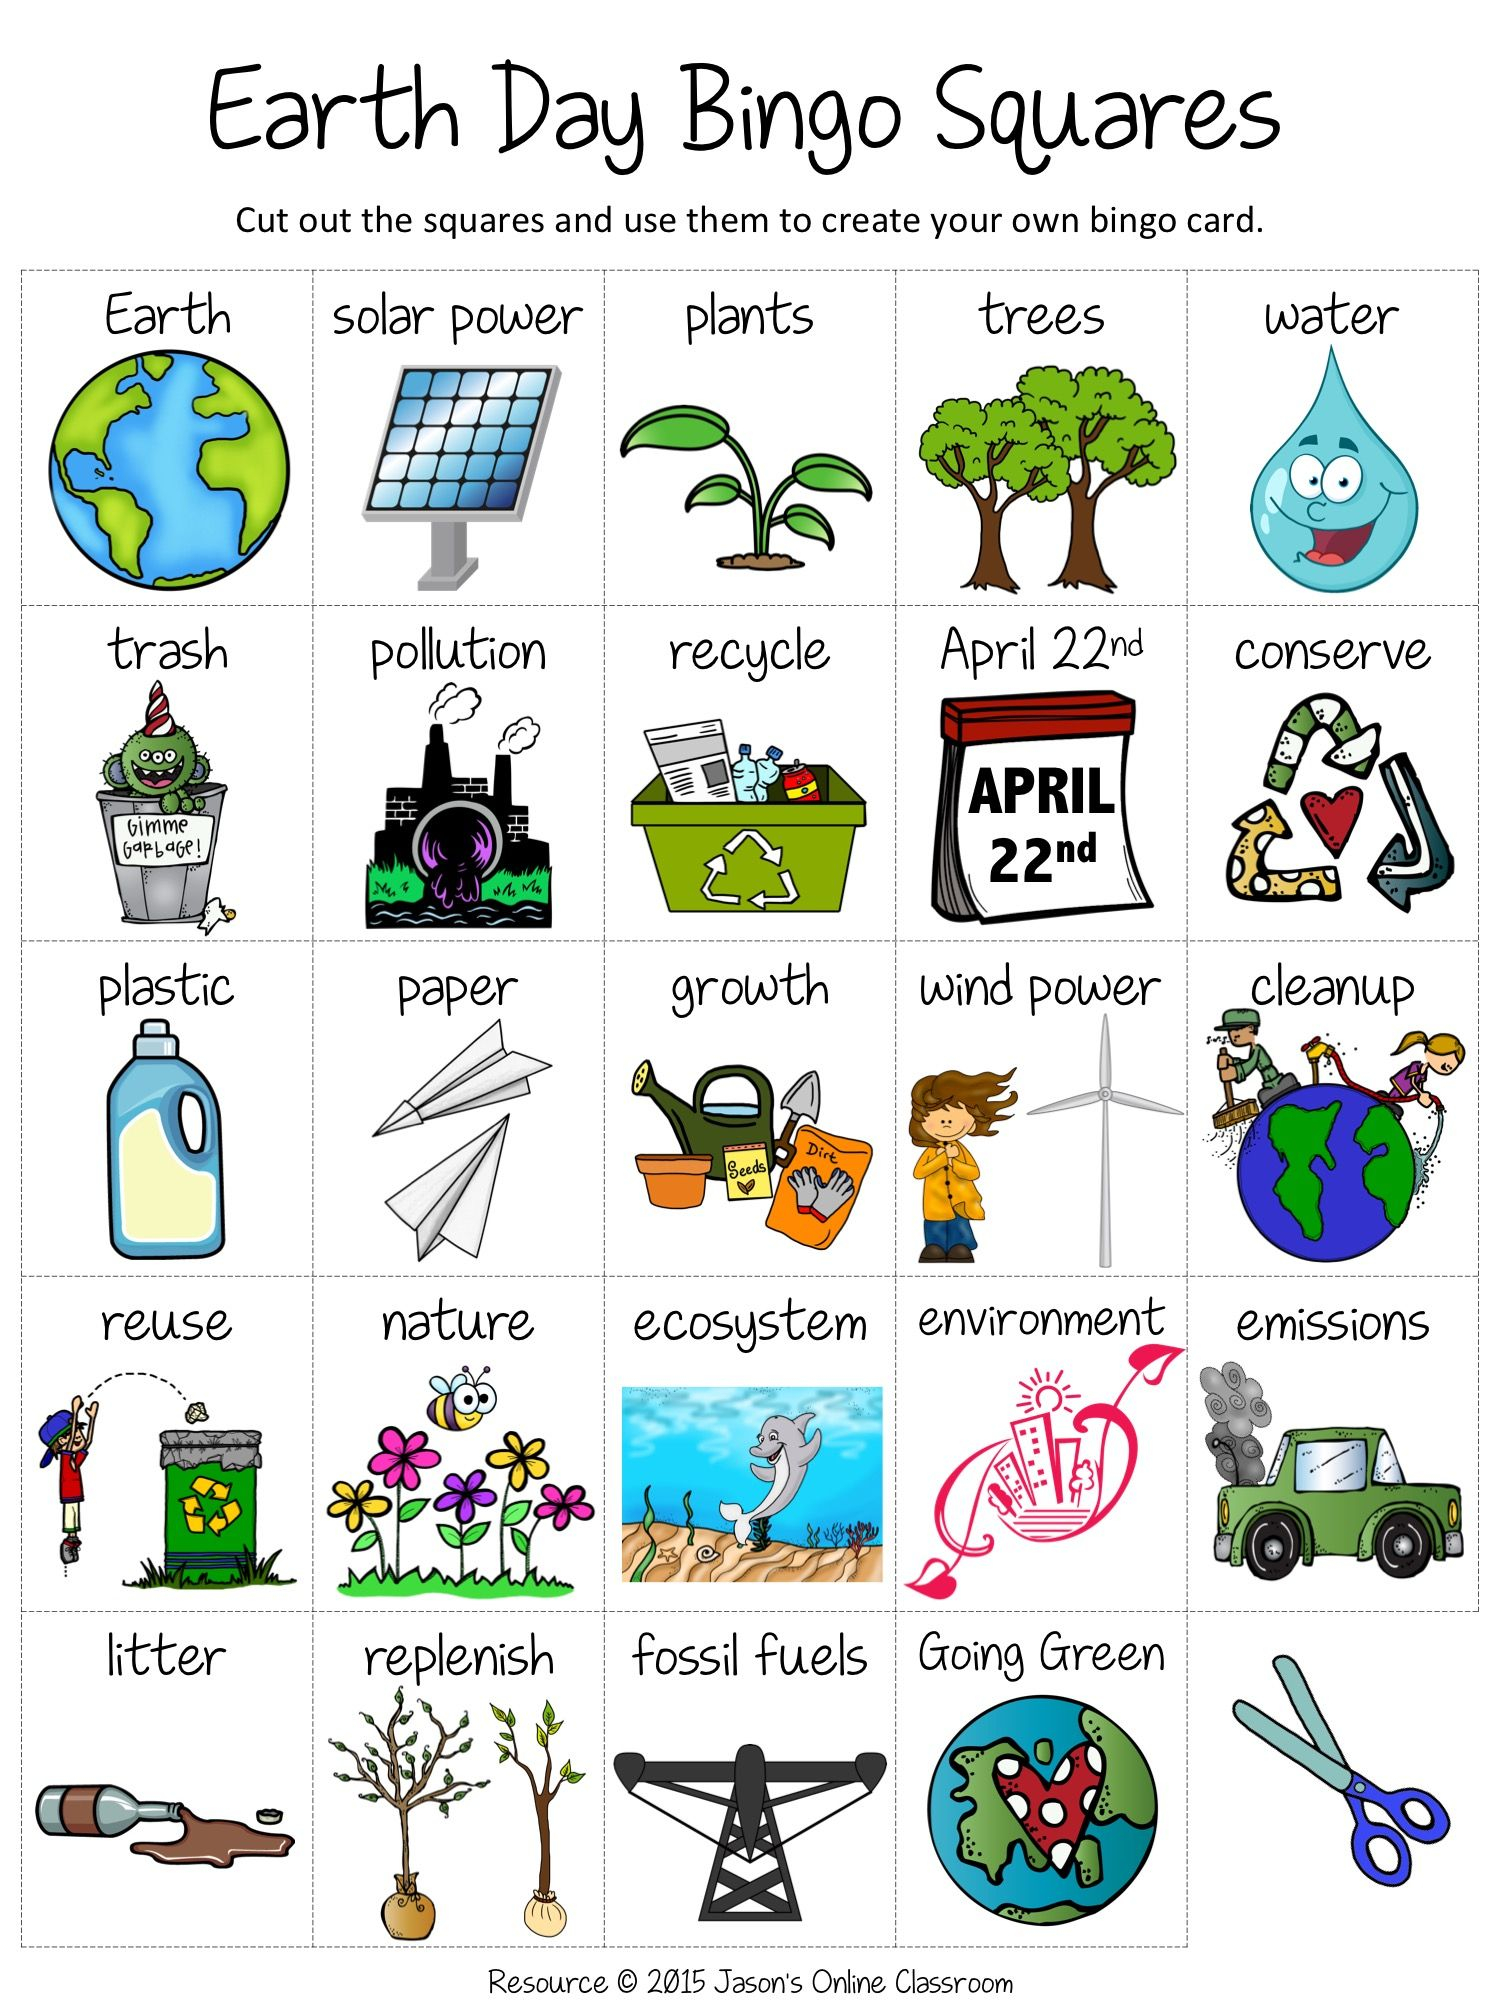 Ecology vocabulary. Earth Day. Earth Day задания. Earth Day Vocabulary. Earth Day Words.